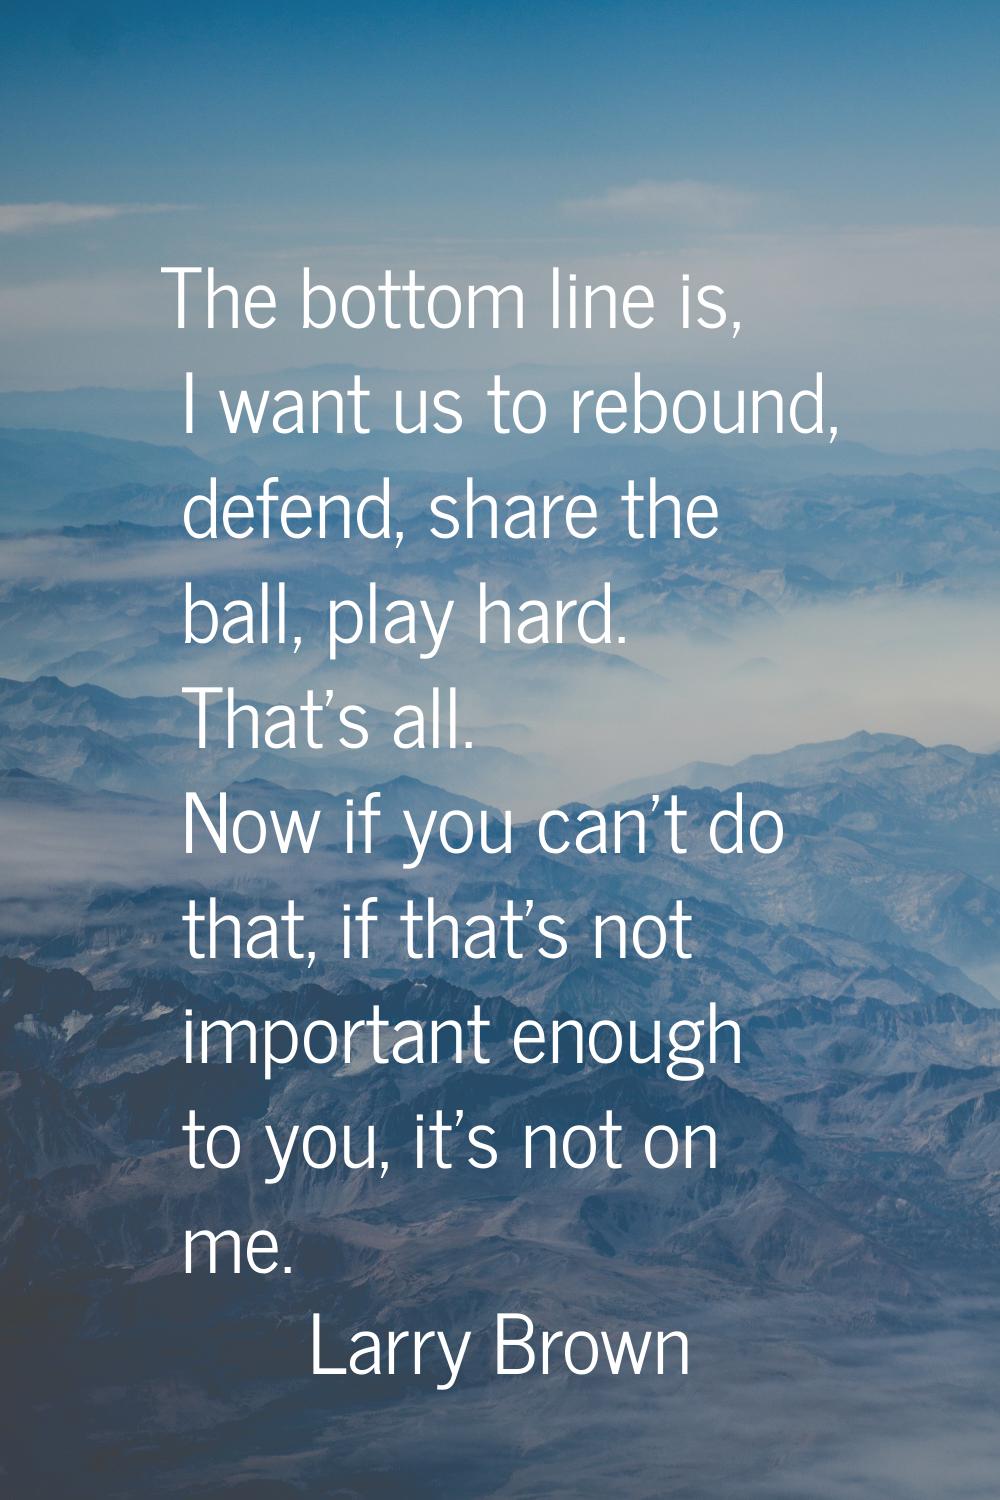 The bottom line is, I want us to rebound, defend, share the ball, play hard. That's all. Now if you